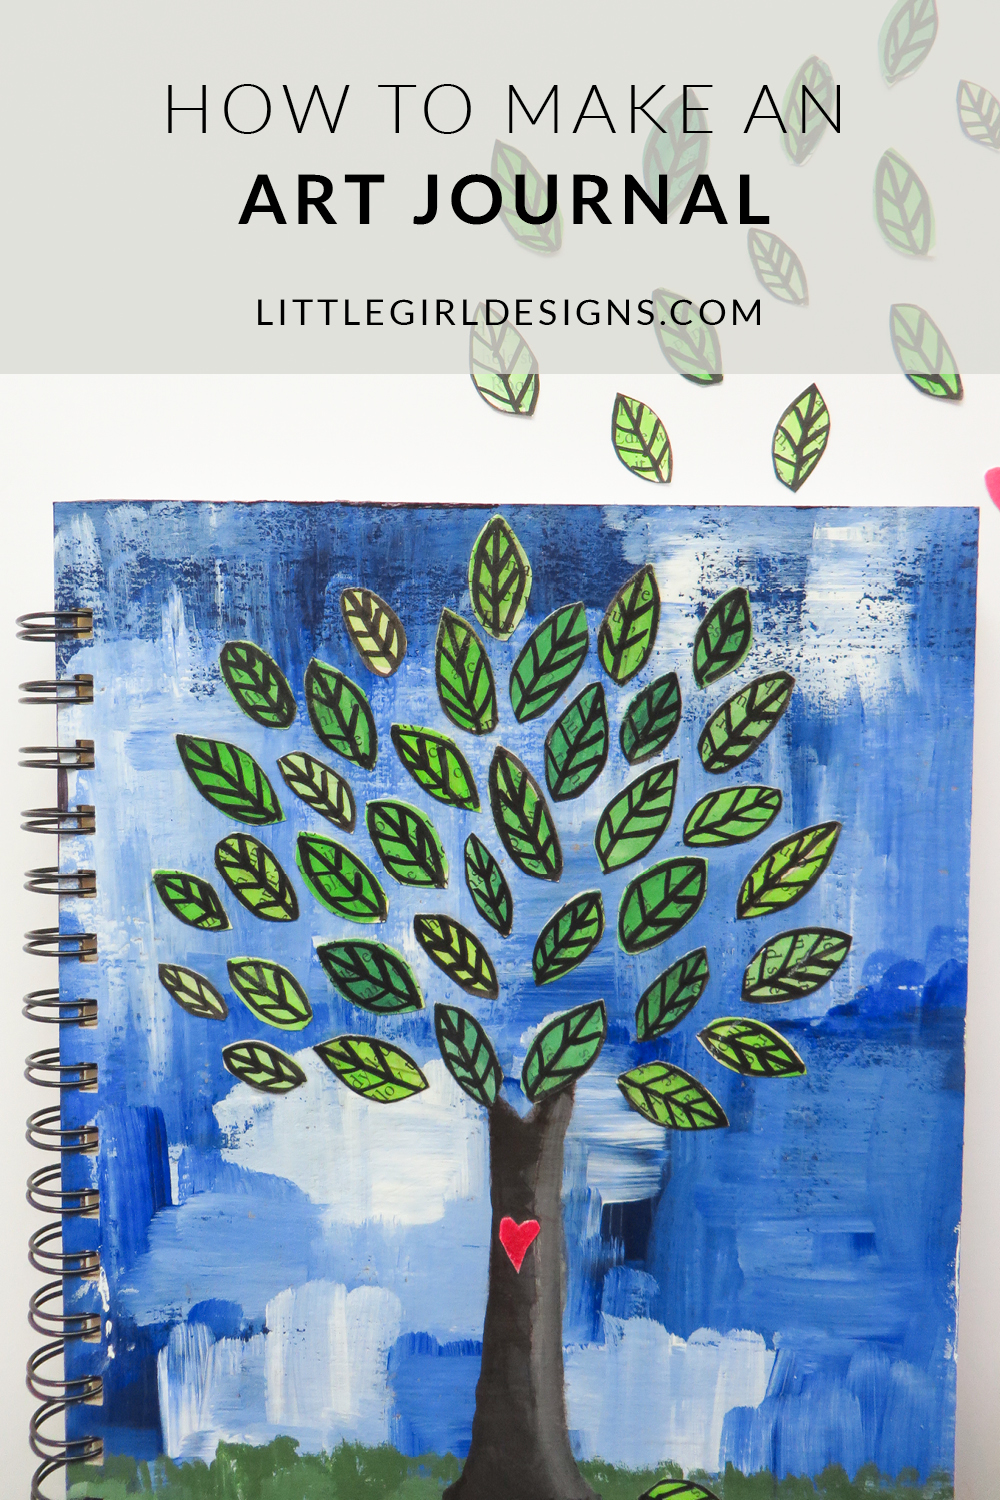 How to Make an Art Journal: Learn how to make your own art journal (or regular journal) using simple supplies (that you might just have already!) @ littlegirldesigns.com